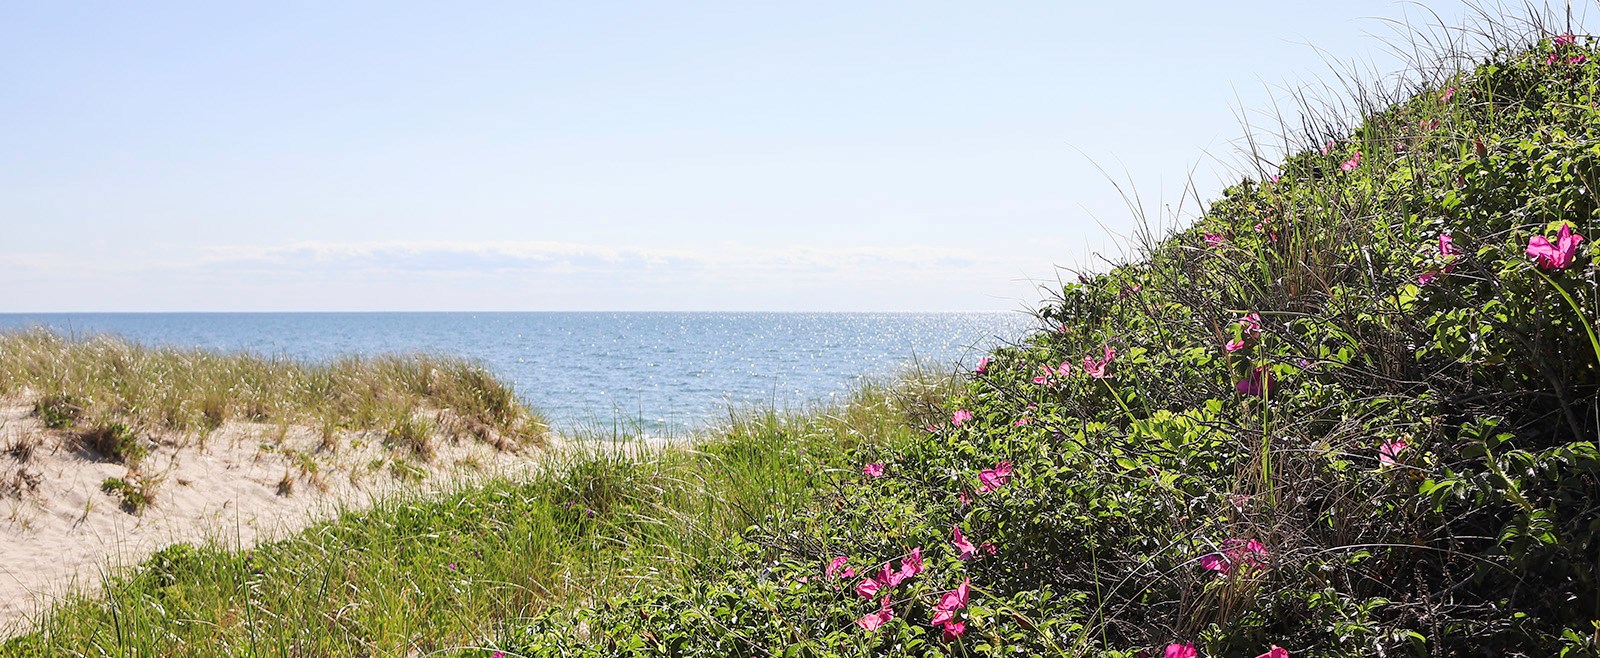 While a wedding is an occasion you'll remember no matter the circumstances, it'll be all the more memorable when turned into an entire weekend spent on Cape Cod! Check out WeNeedaVacation's recommendations when it comes to planning your wedding weekend!